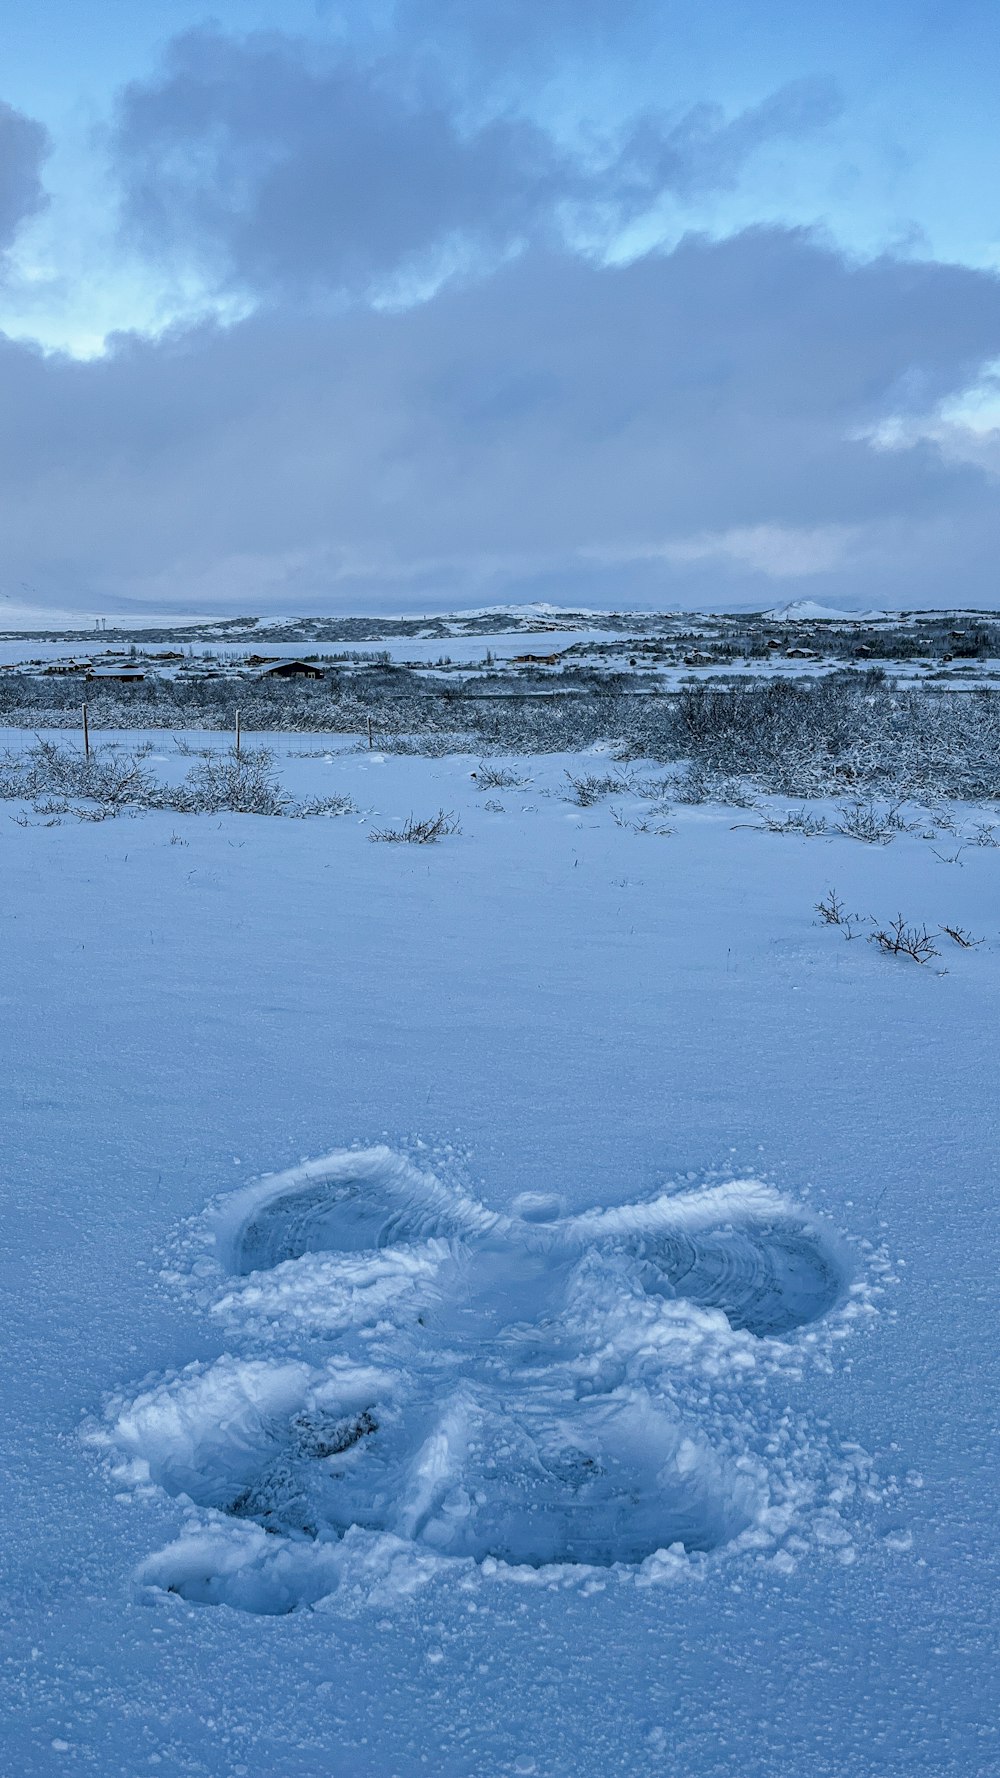 a snow covered field with a small animal's footprints in the snow